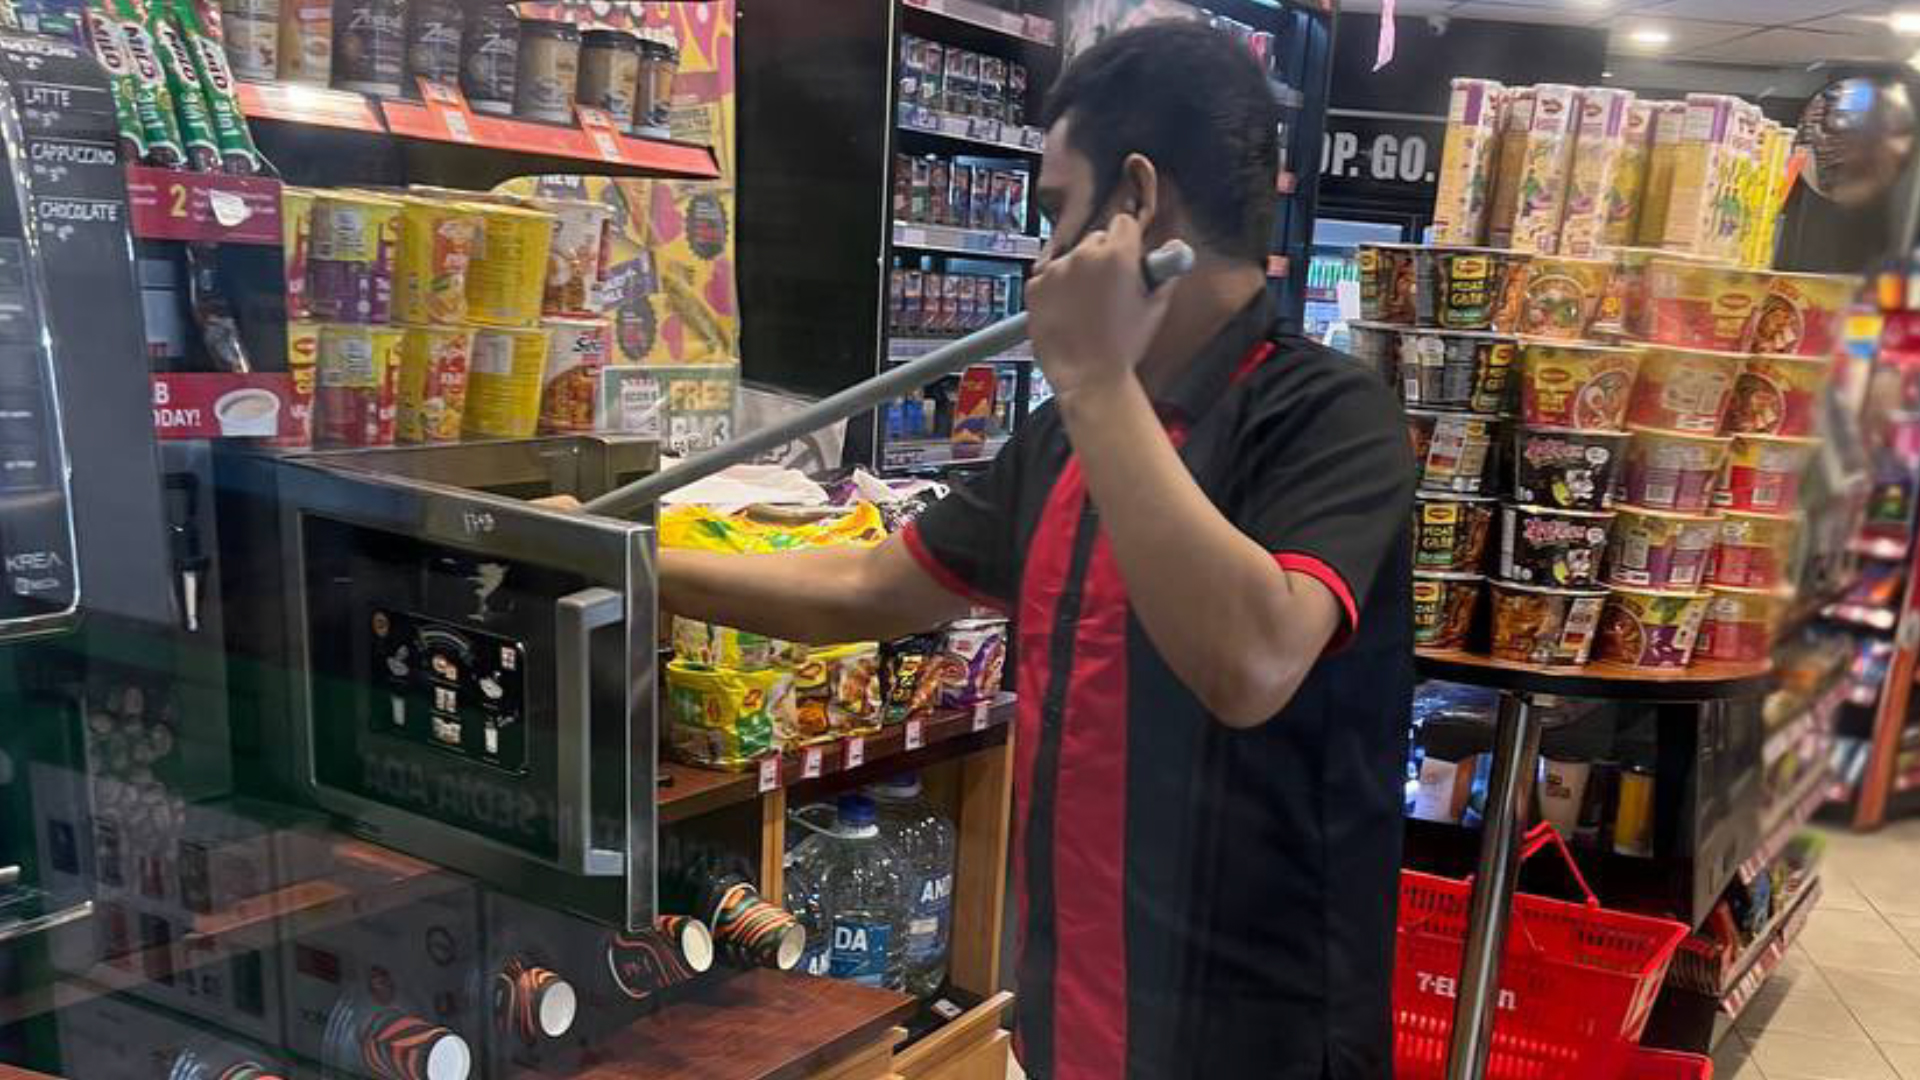 Please Clean Microwave After Use Sign Ignored: 7-Eleven Malaysia Staff Sparks Outrage After Cleaning Mop in Microwave